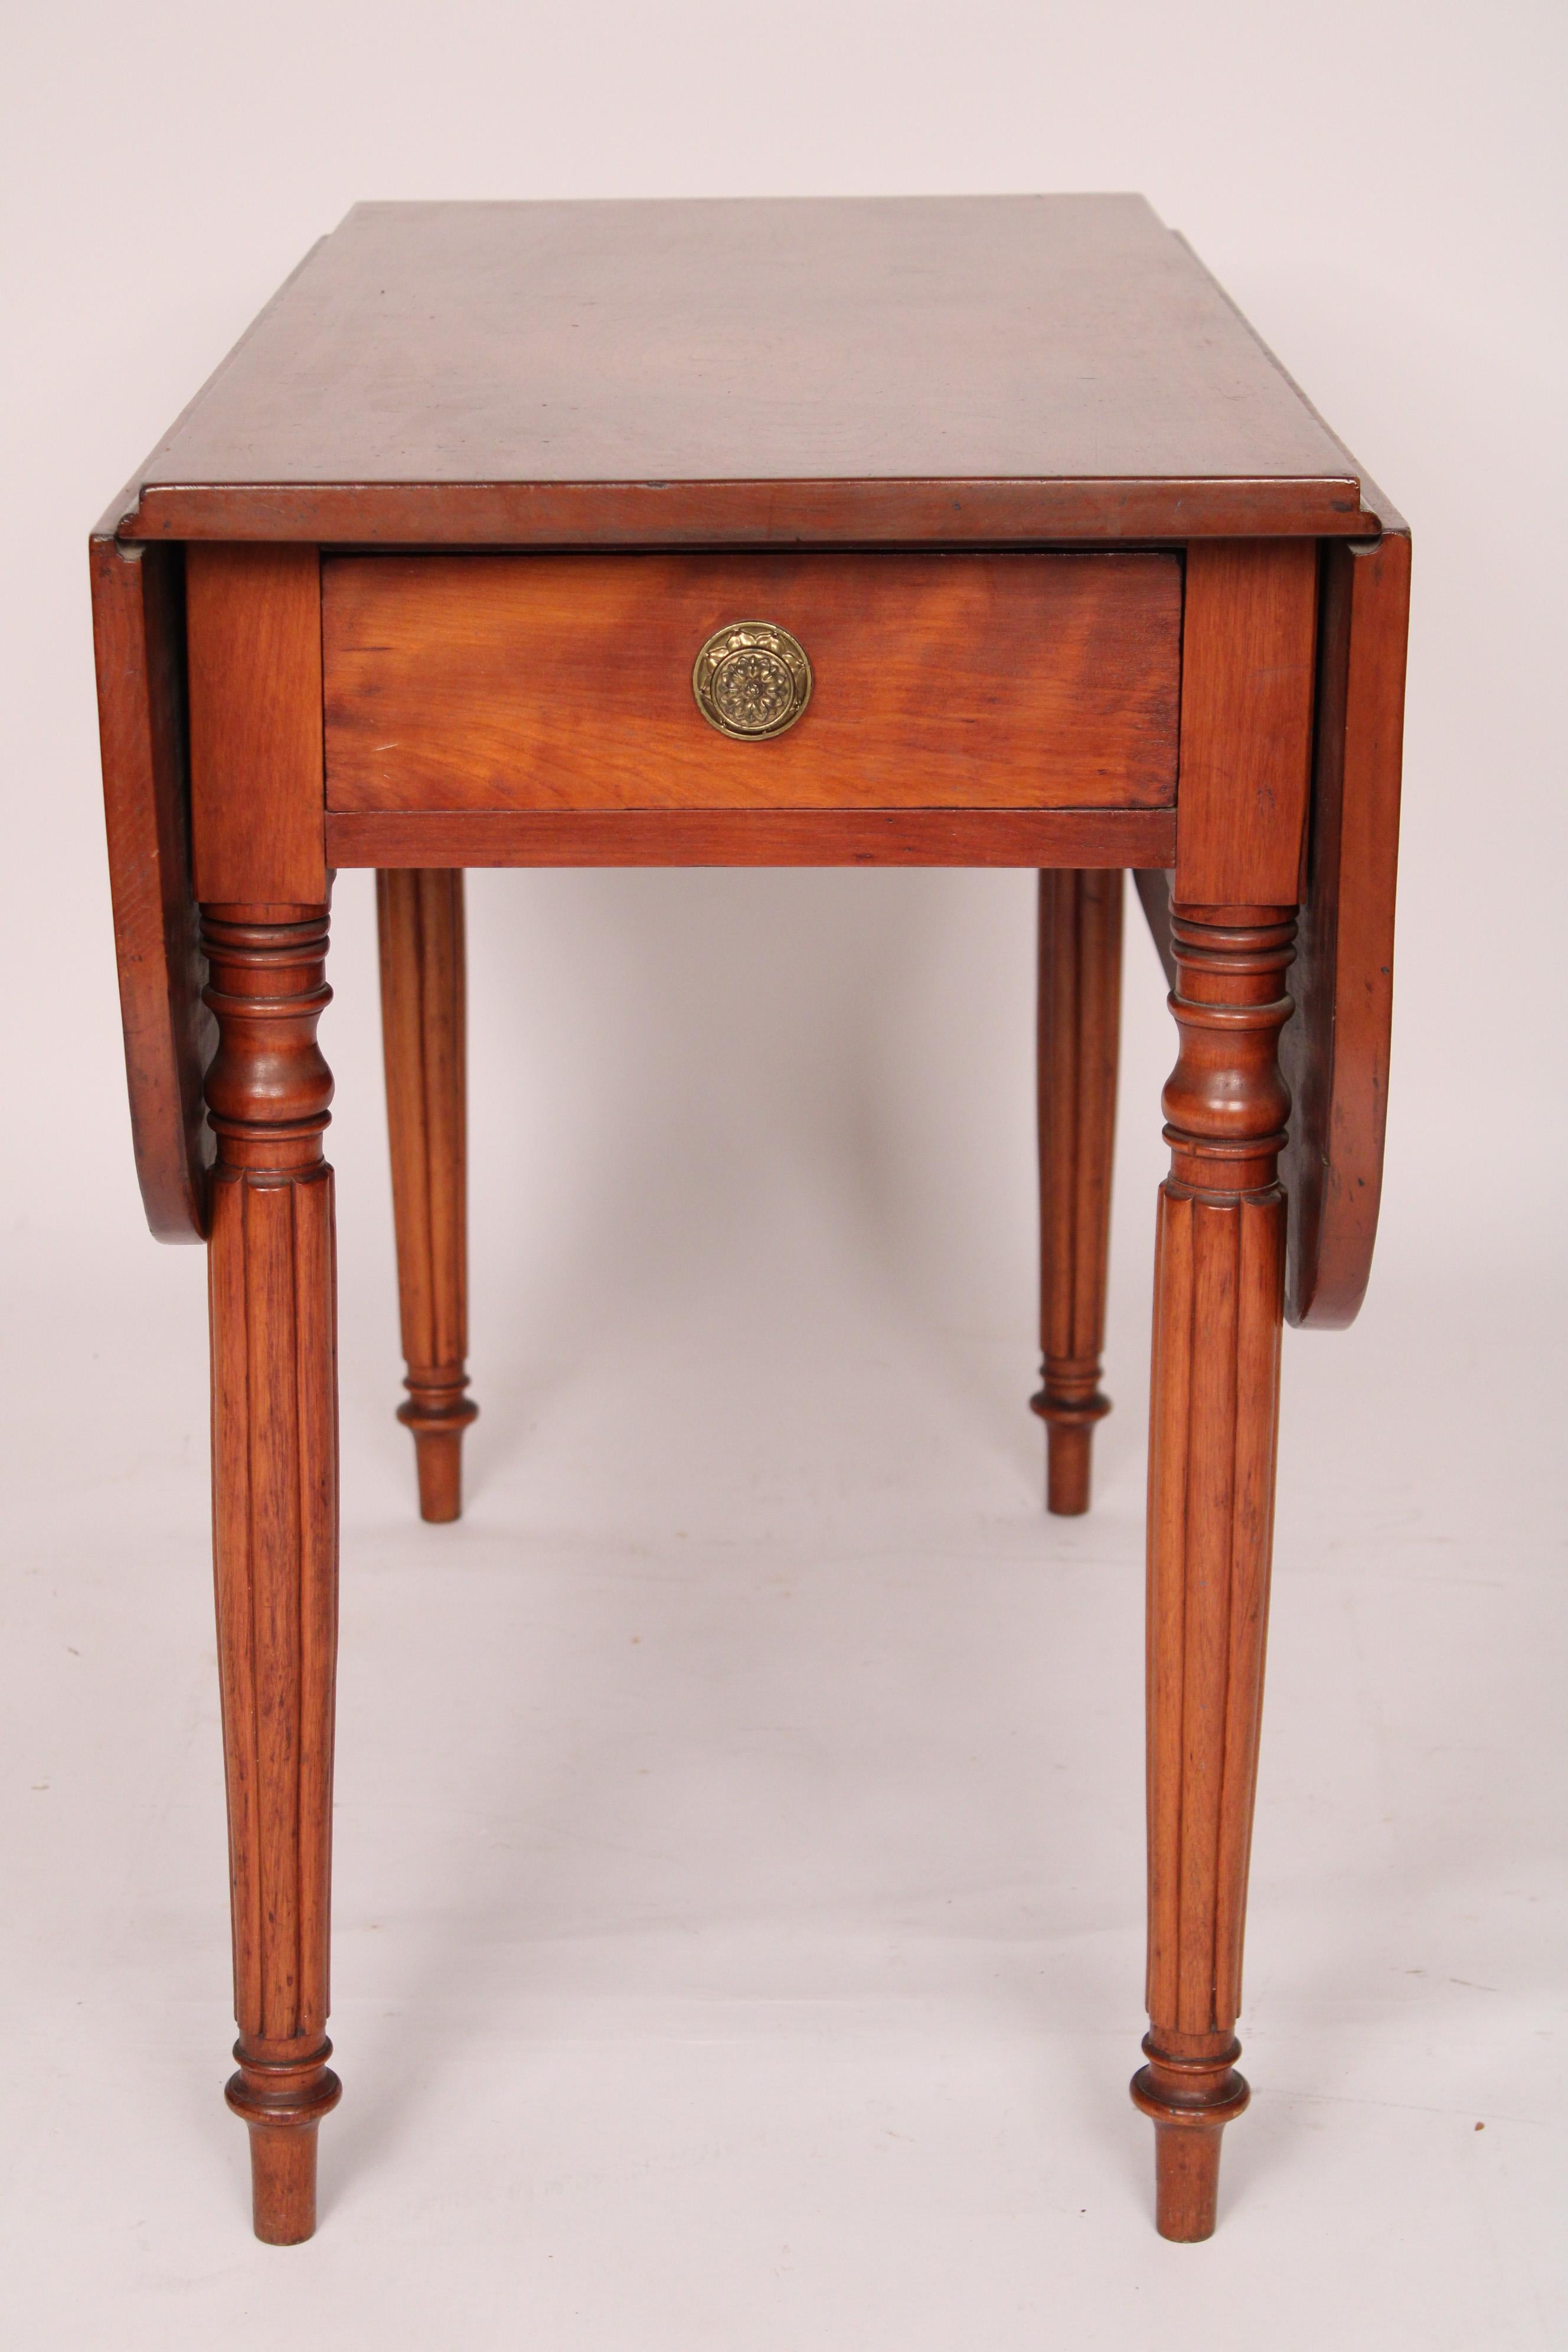 19th Century American Classical Style Cherry Wood Drop Leaf Table